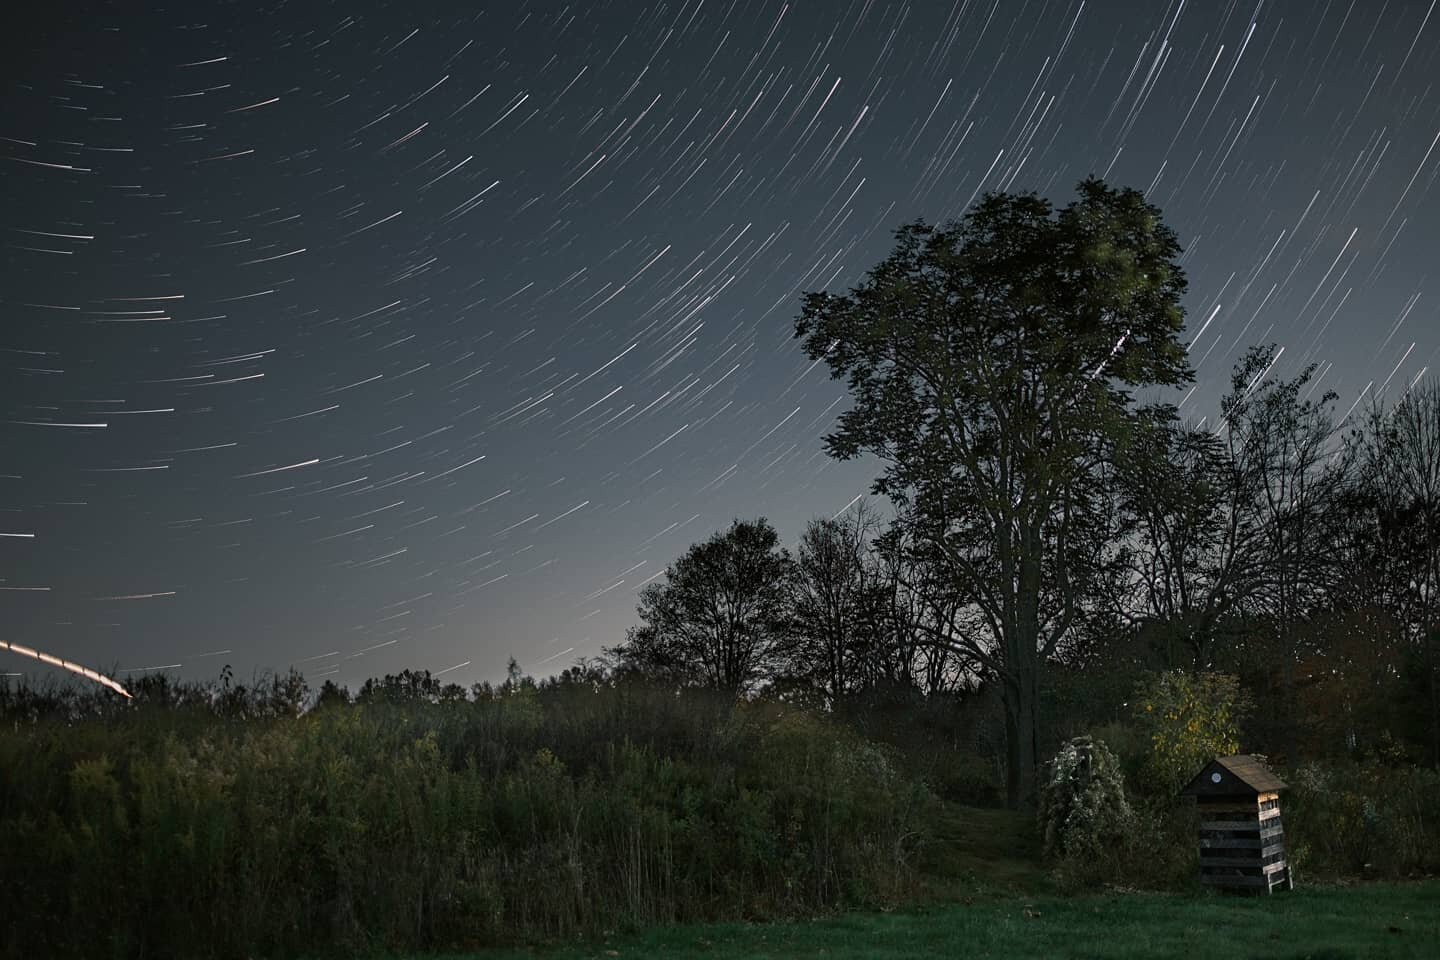 First time doing star trails. Pretty interesting science behind it glad I picked up a new move :)